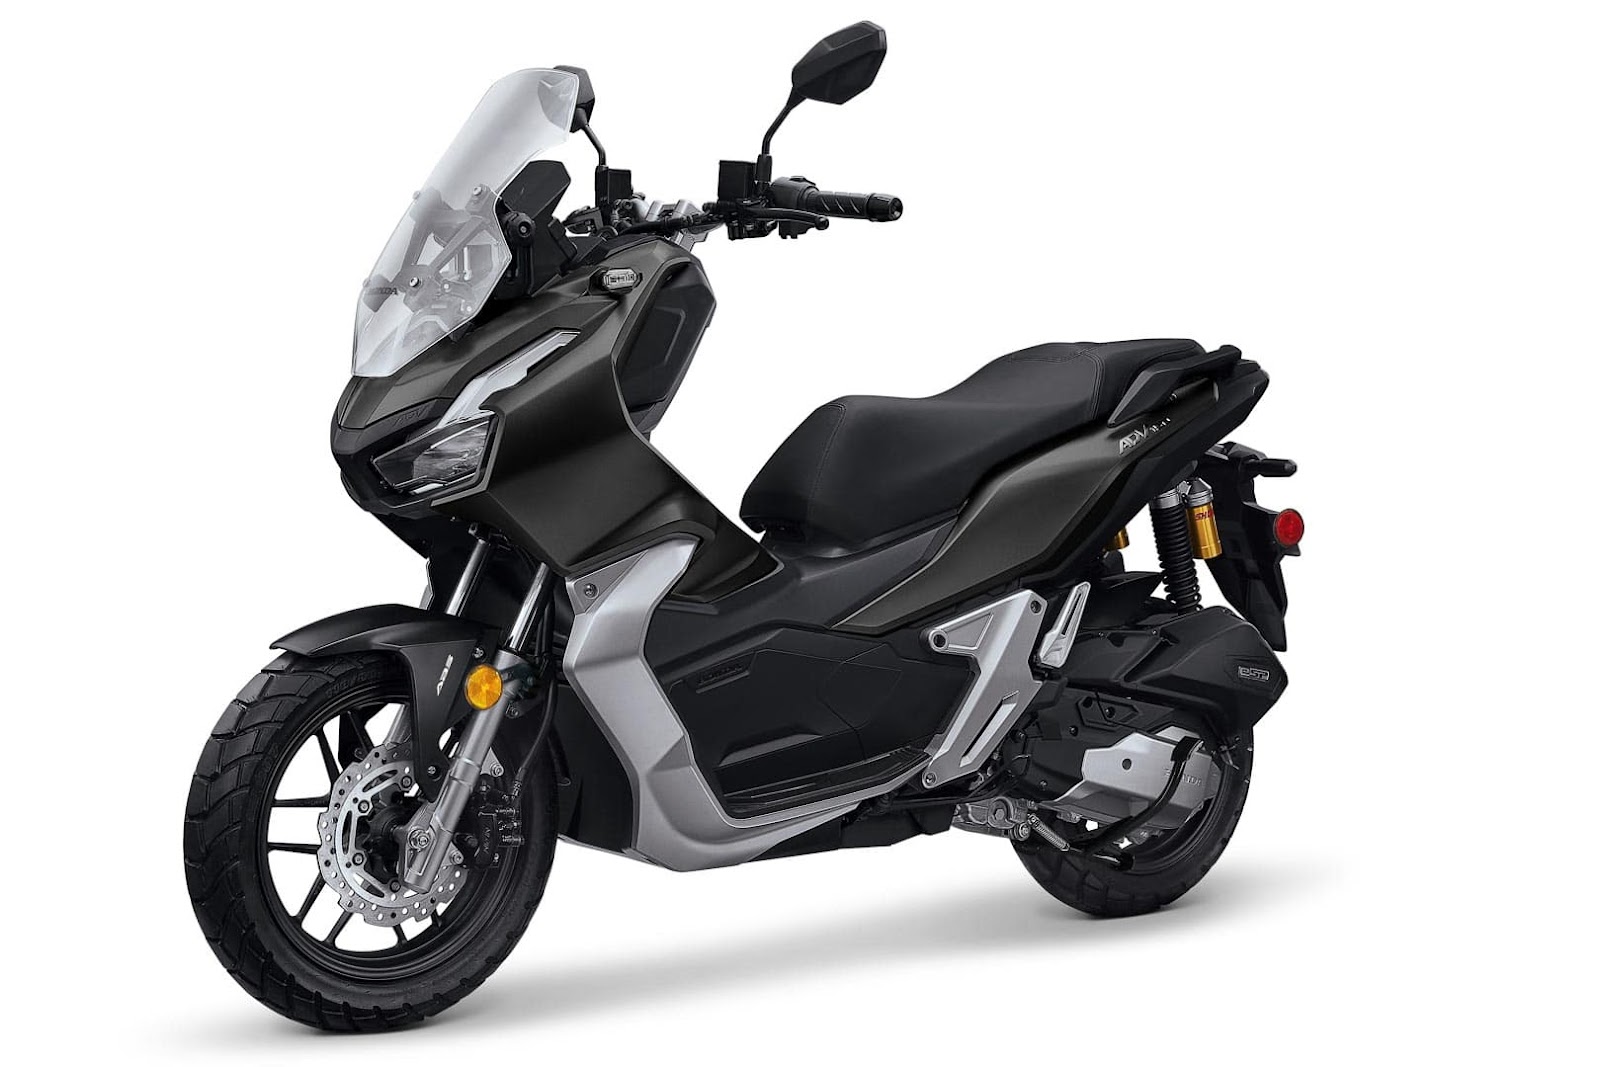 Black and gray trimmed Honda ADV150 adventure scooter - powerful and versatile transportation for off-road and on-road adventures